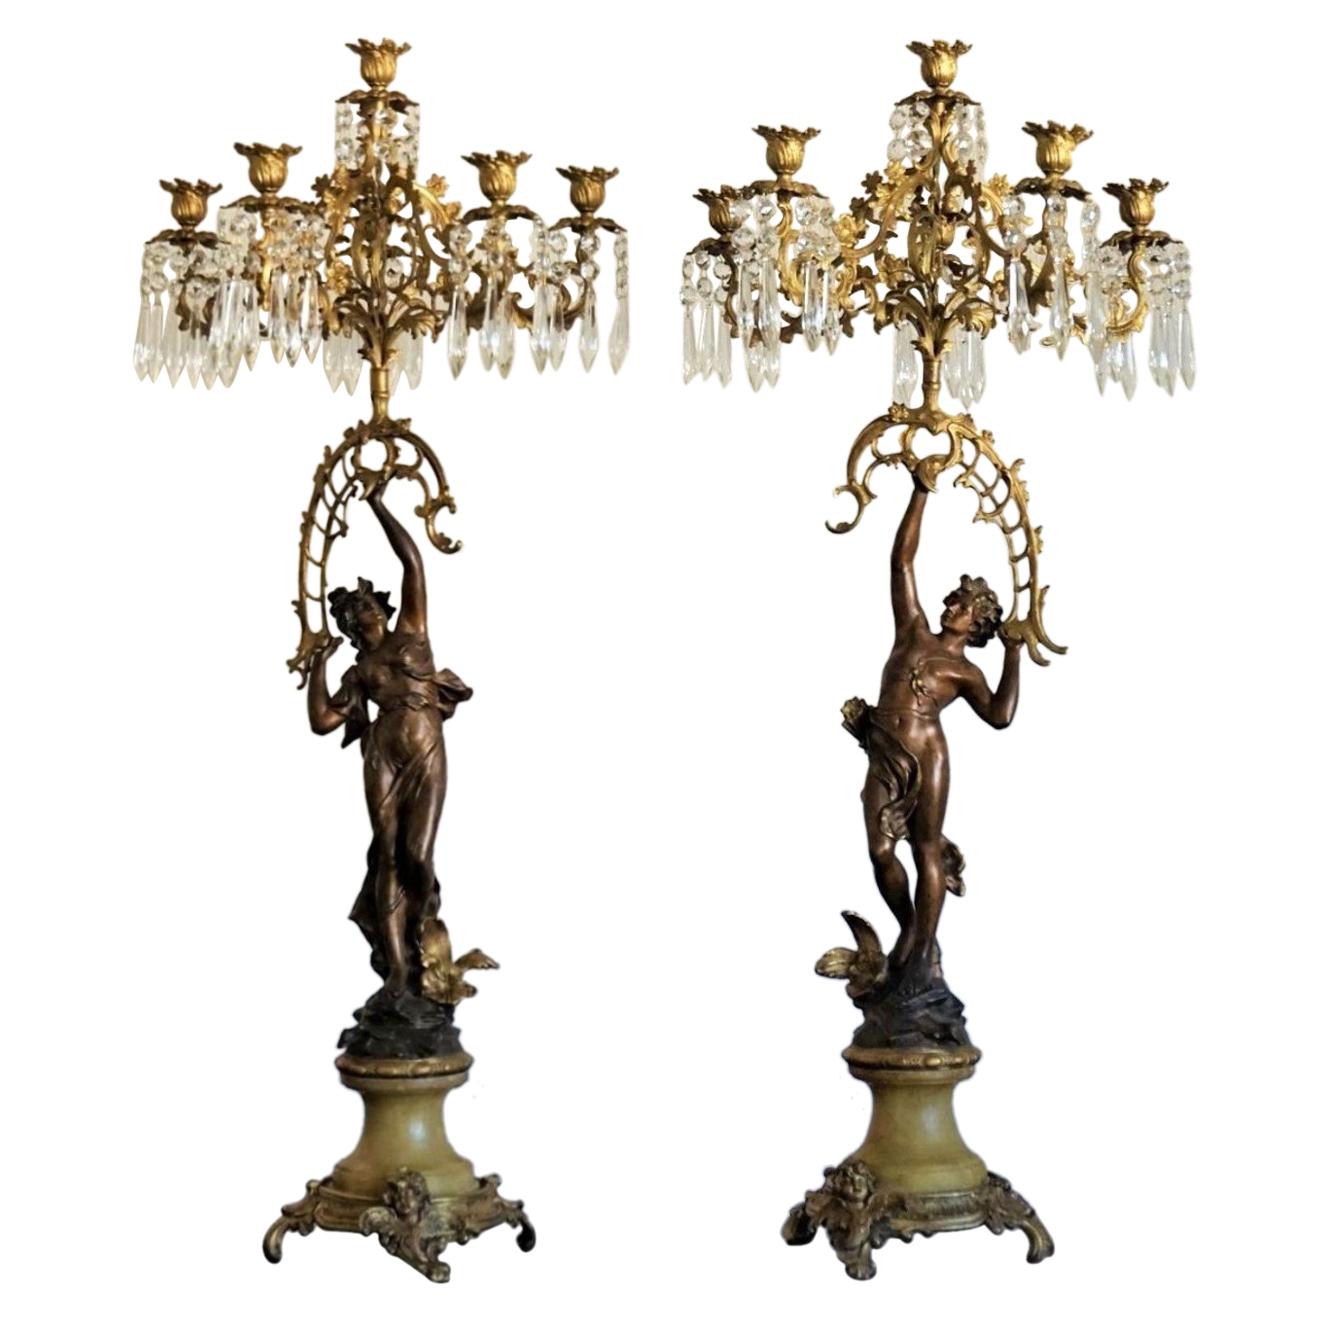 19th Century Pair of French Figurines Patinated and Doré Bronze Candelabra